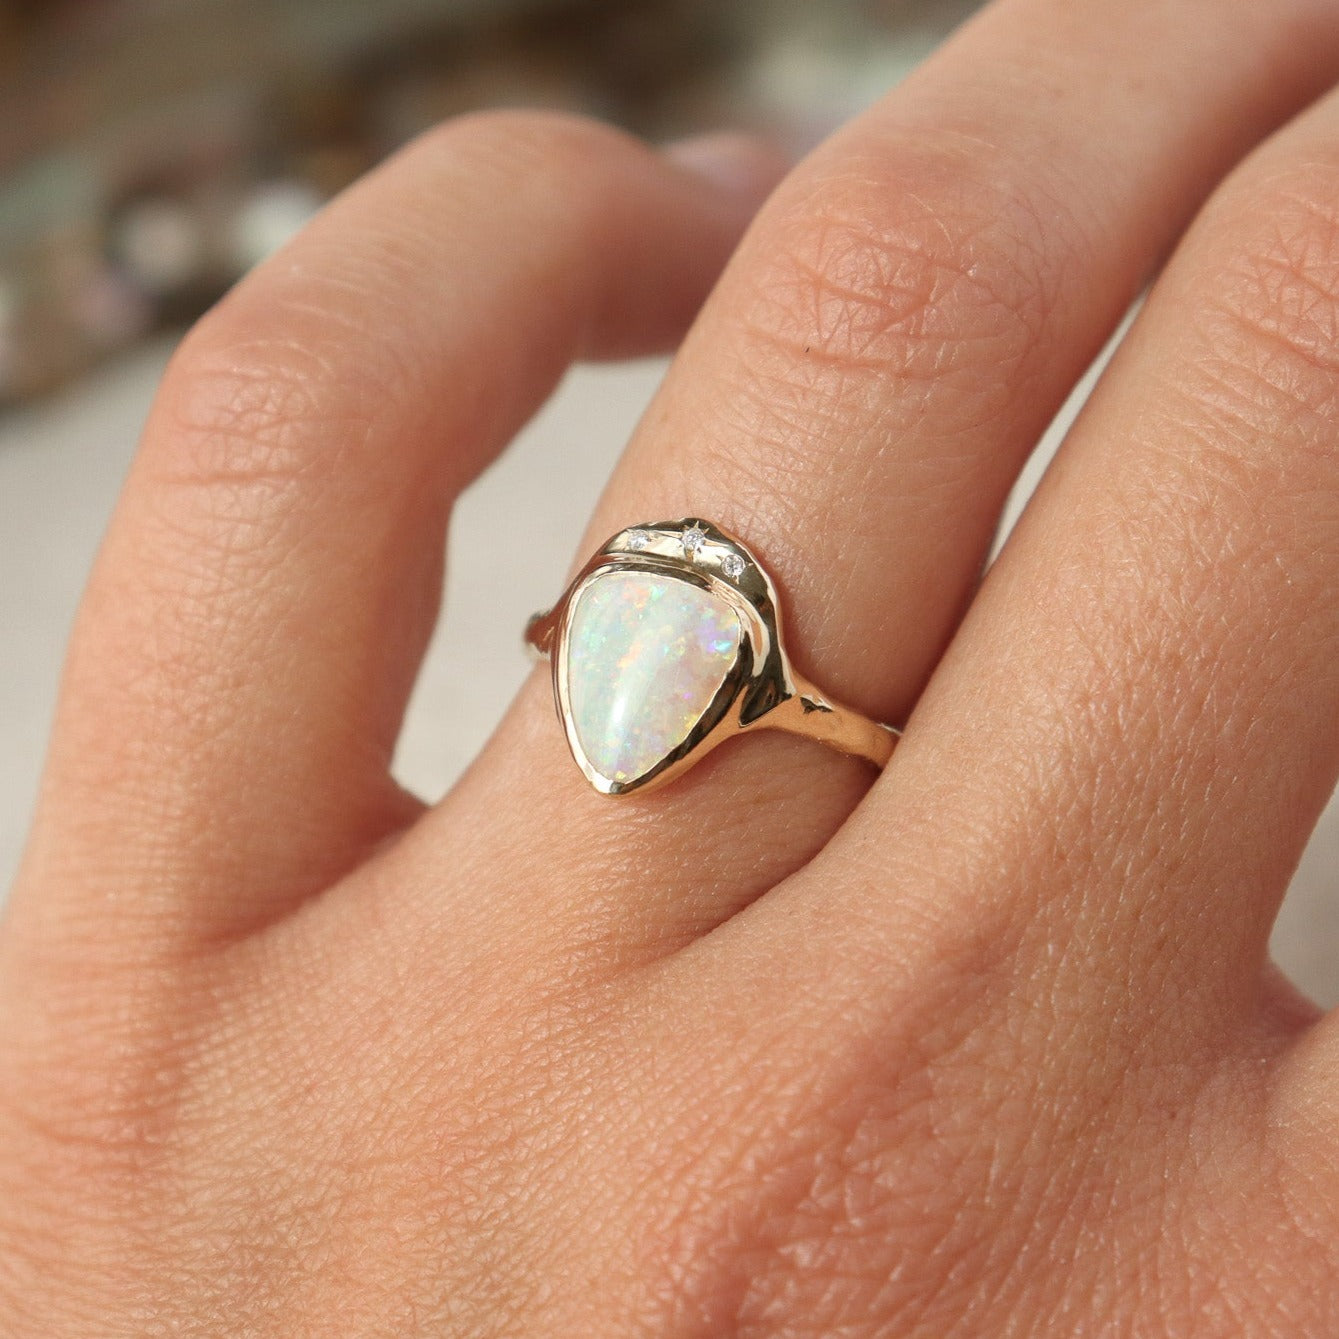 White triangle opal is bezel set in 14k gold with three star set diamonds, worn on the ring finger.